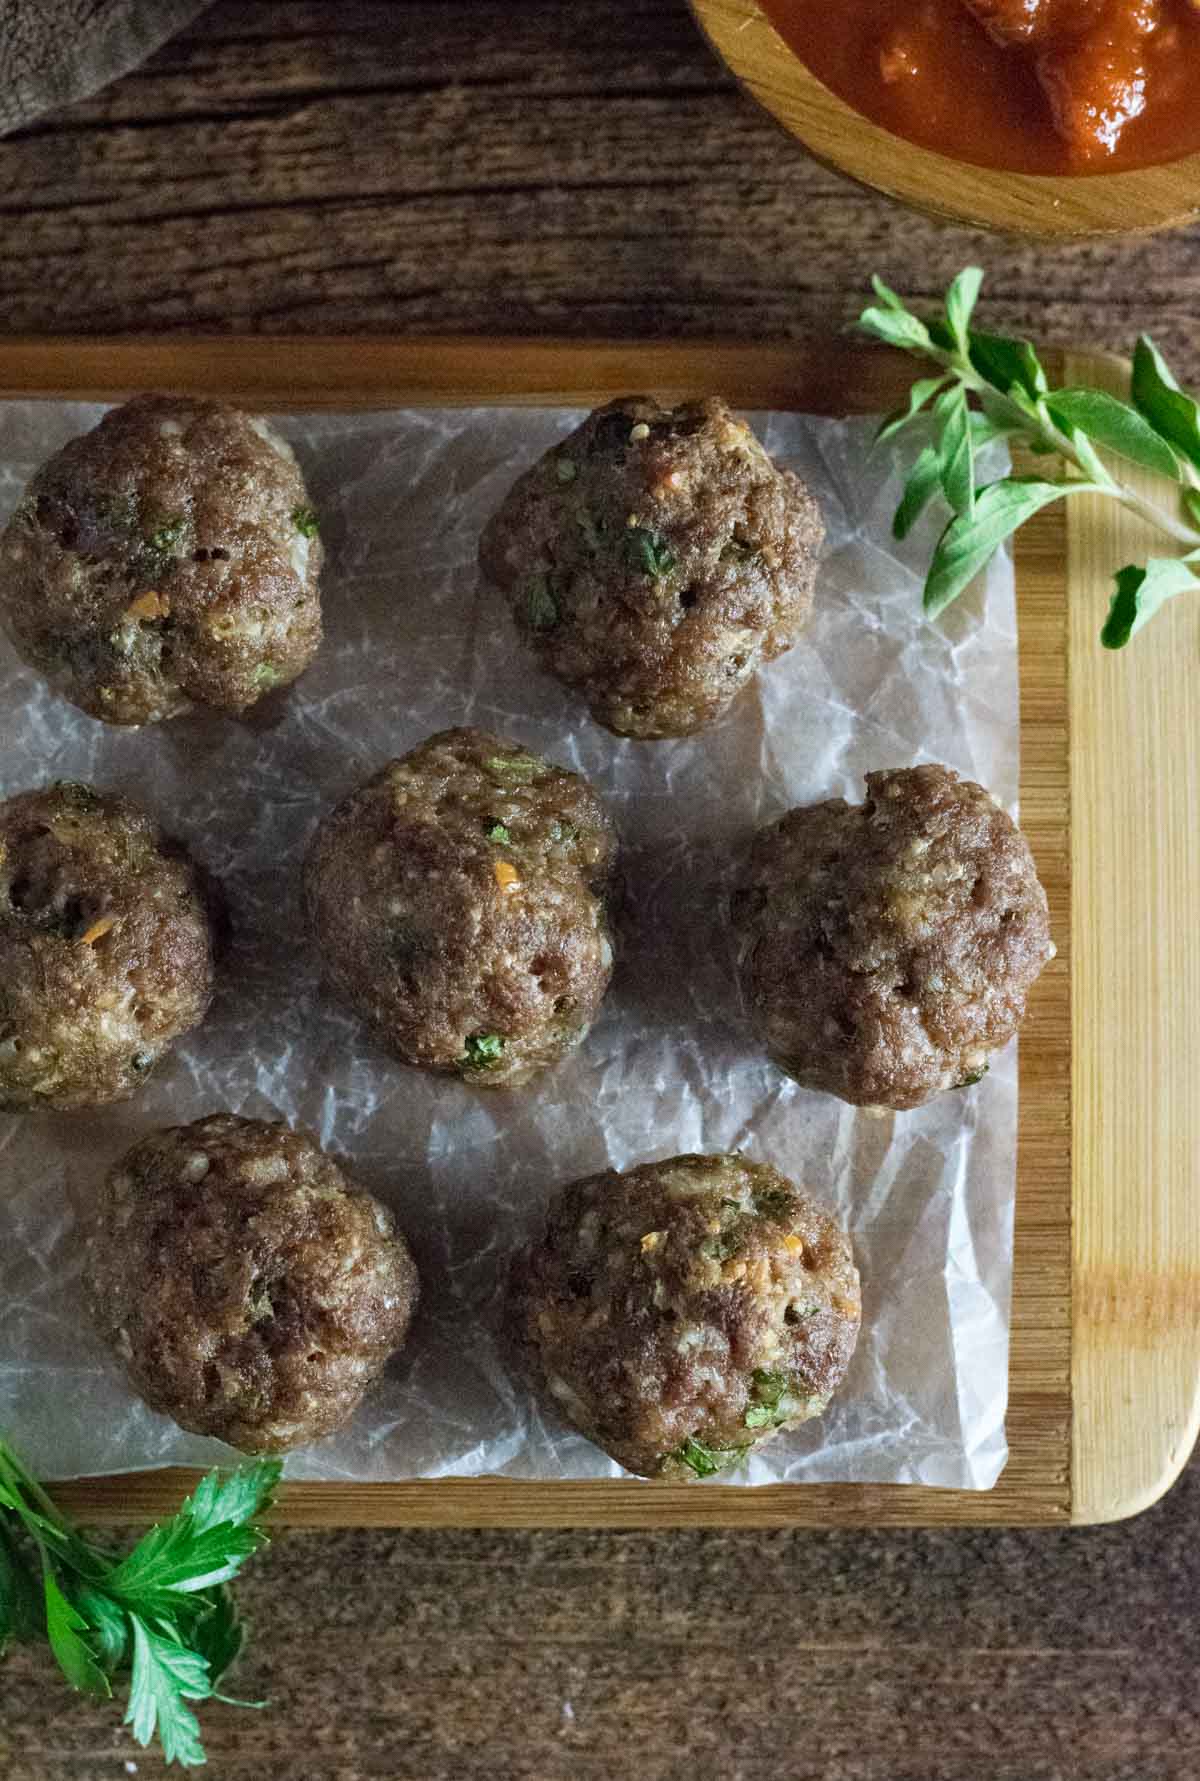 Serving egg-free meatballs with sauce.